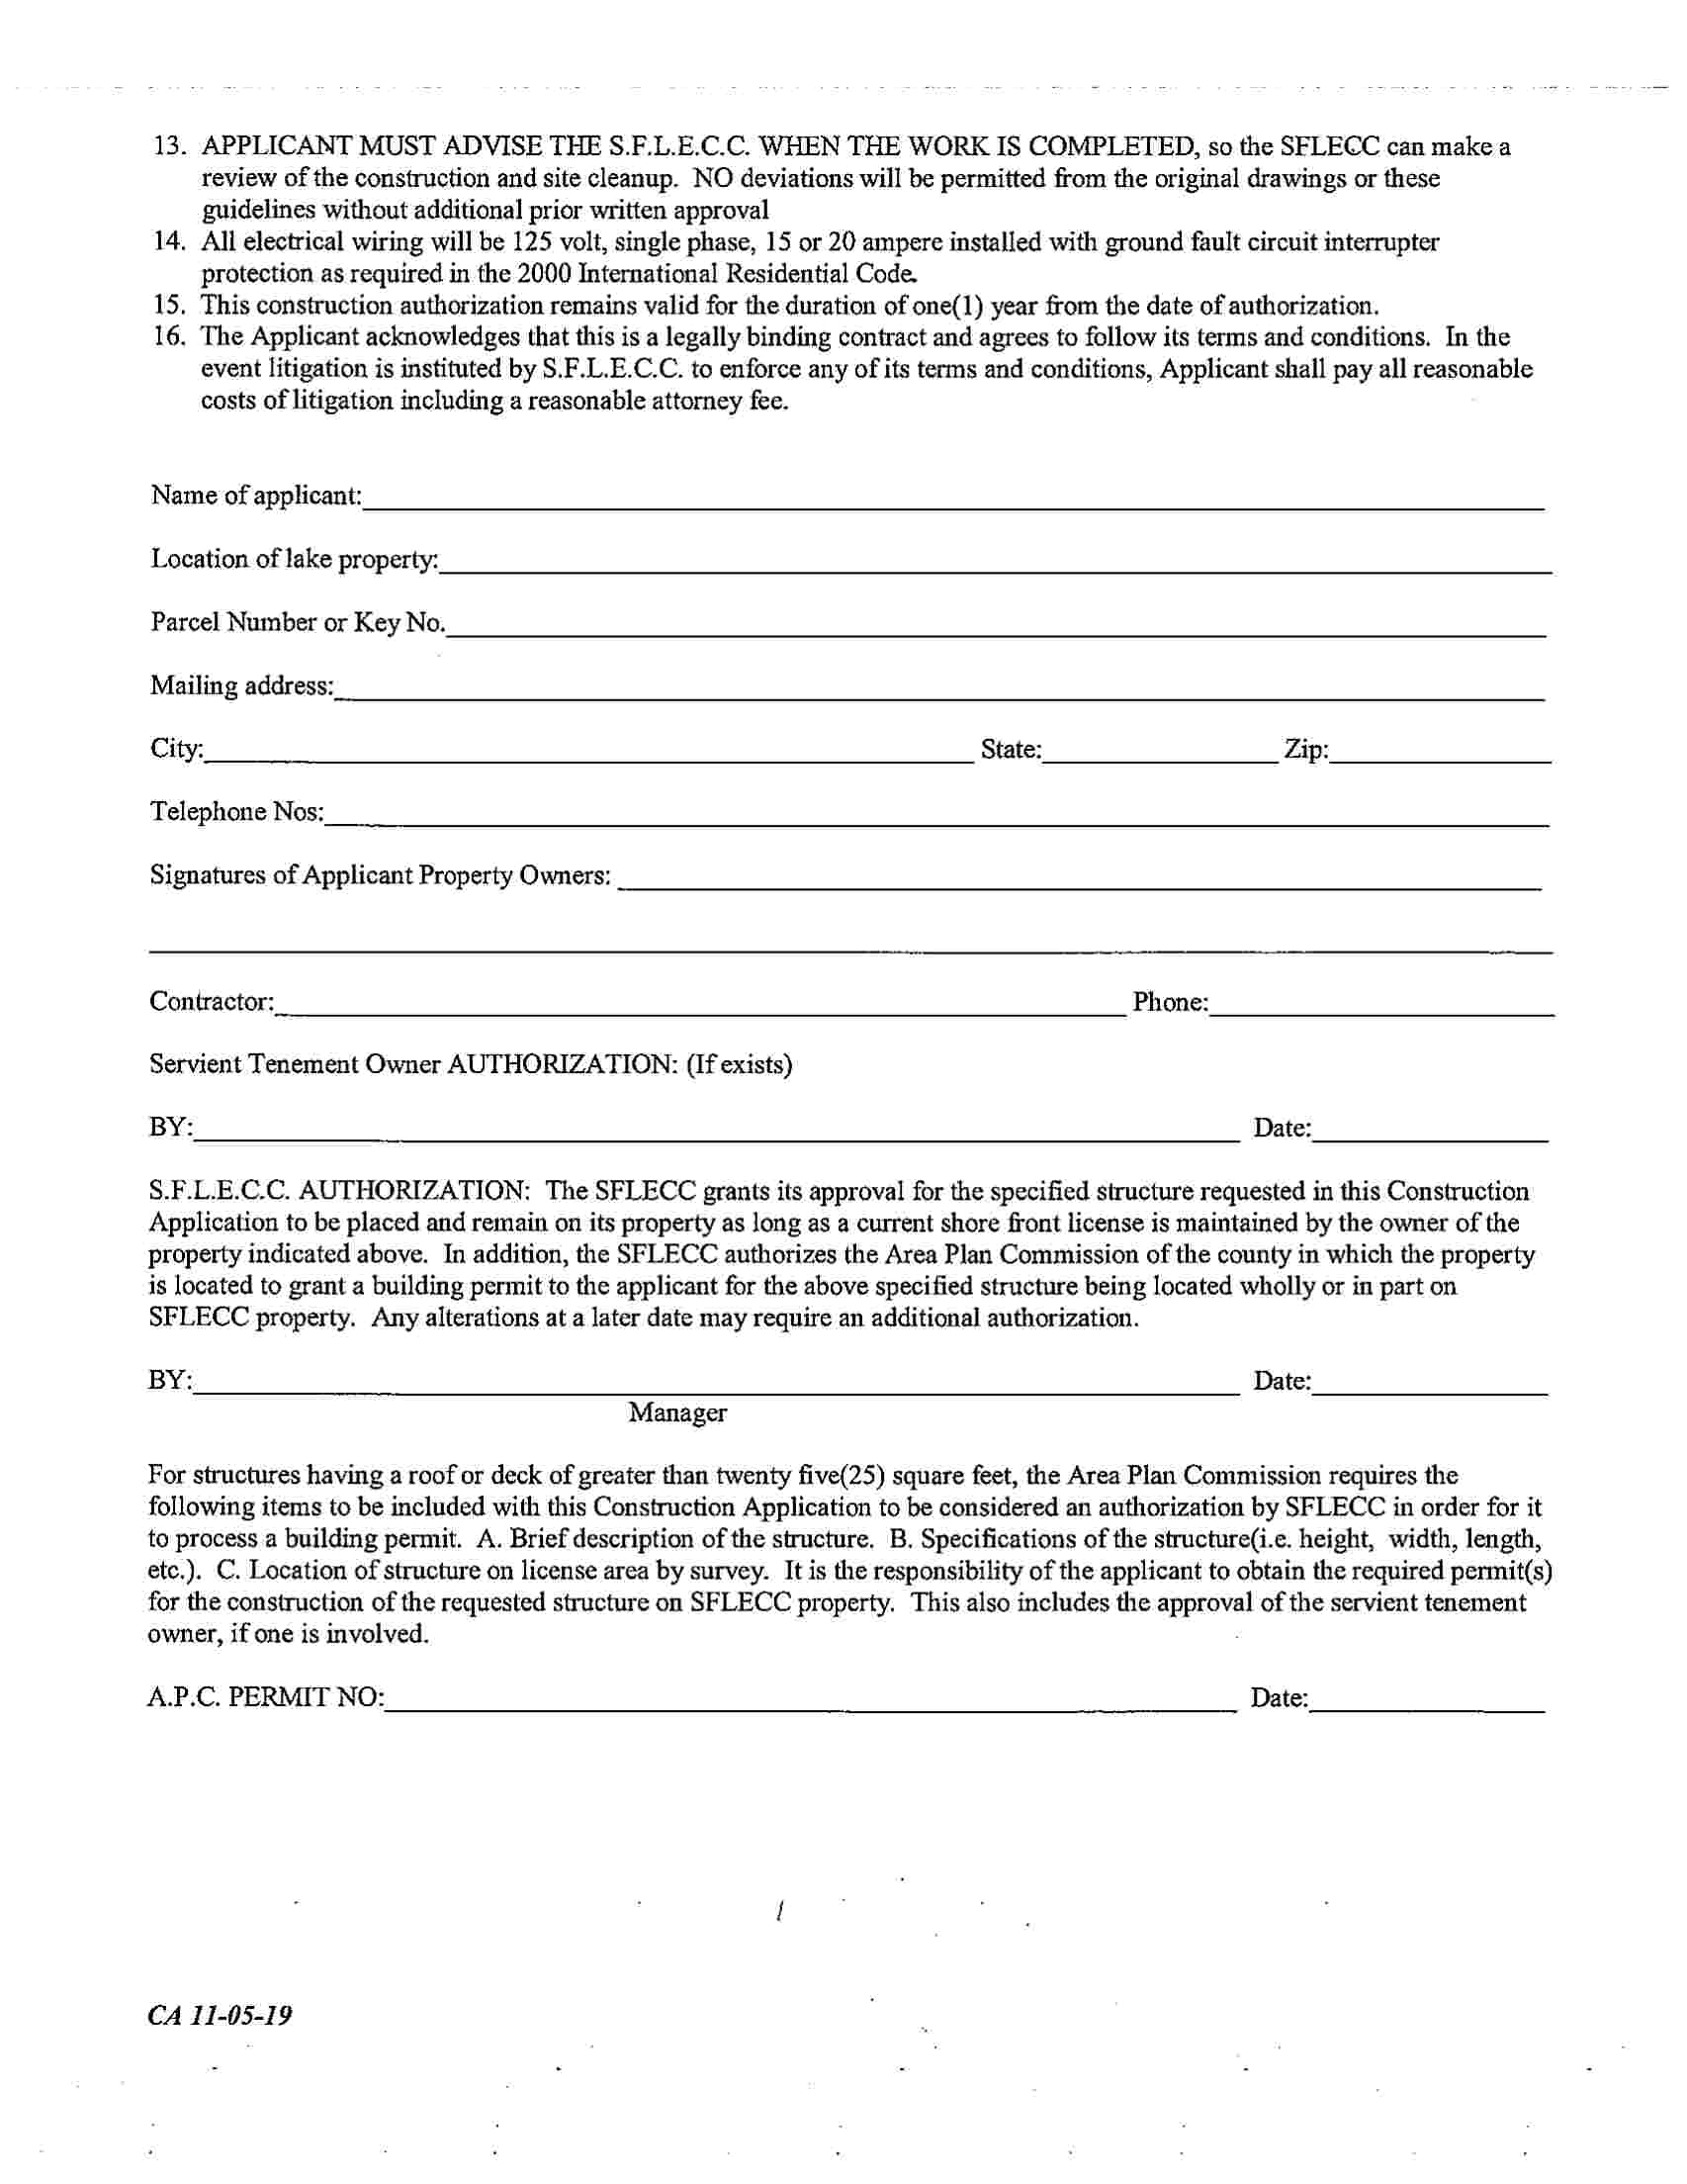 Construction Application Page 2